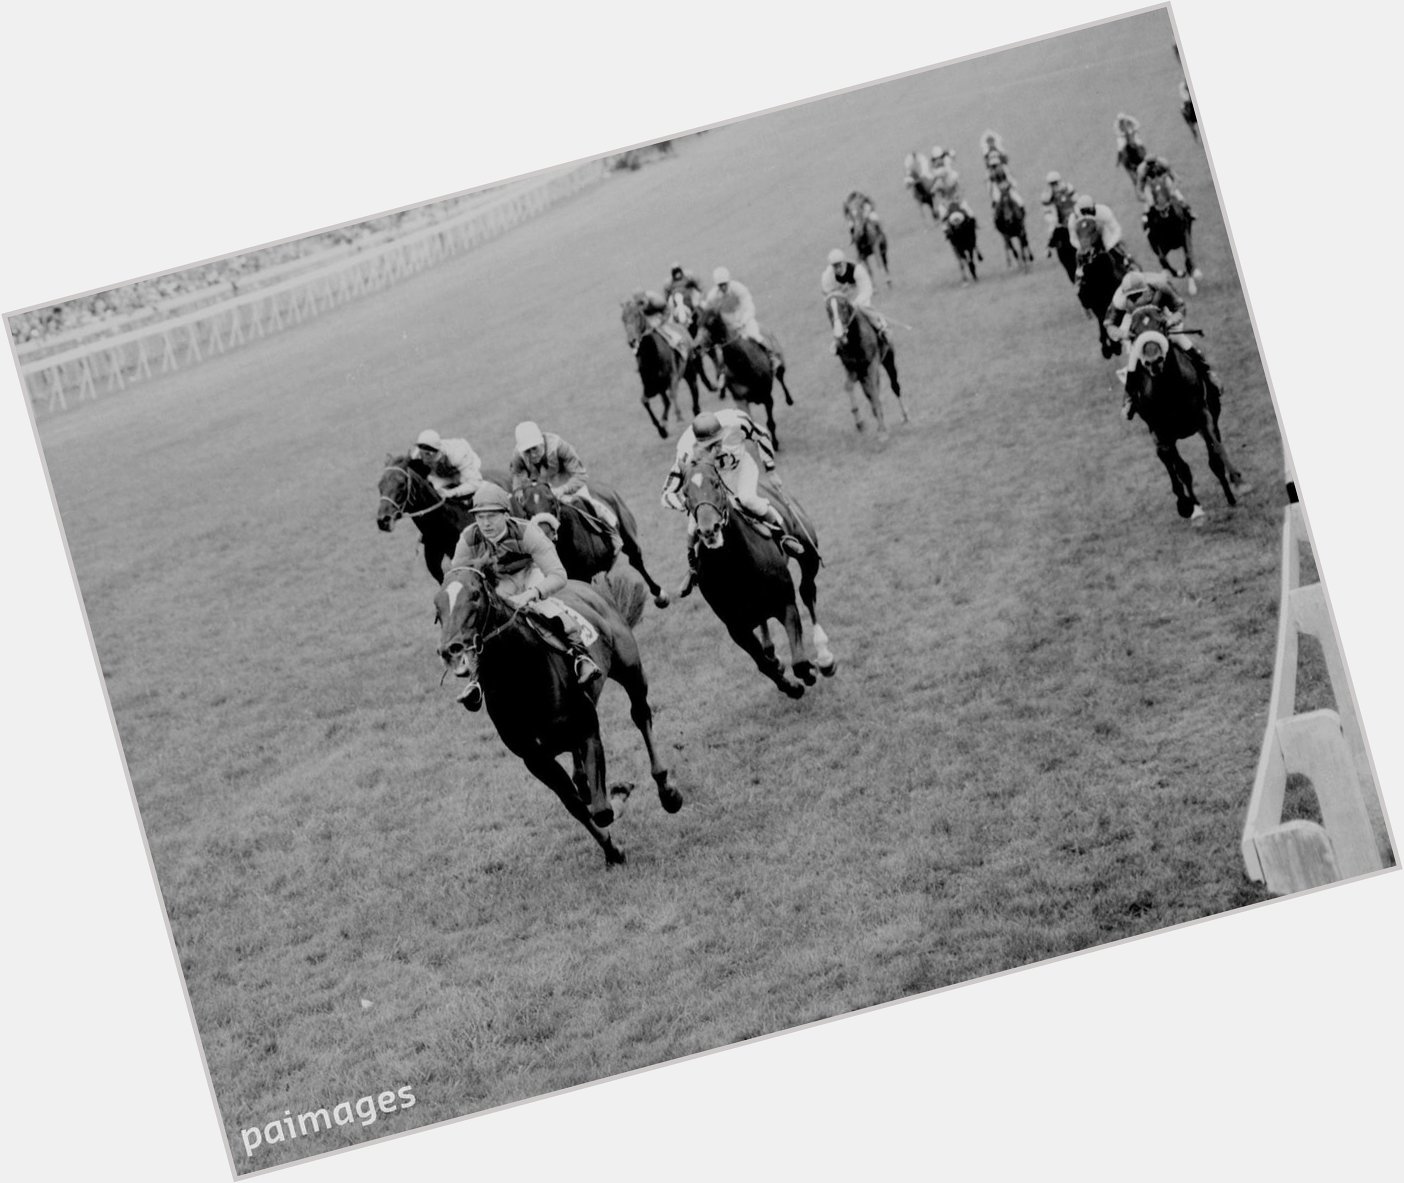 A very happy birthday to Lester Piggott! Here he is, winning the Derby at Epsom in 1957 on Crepello. 